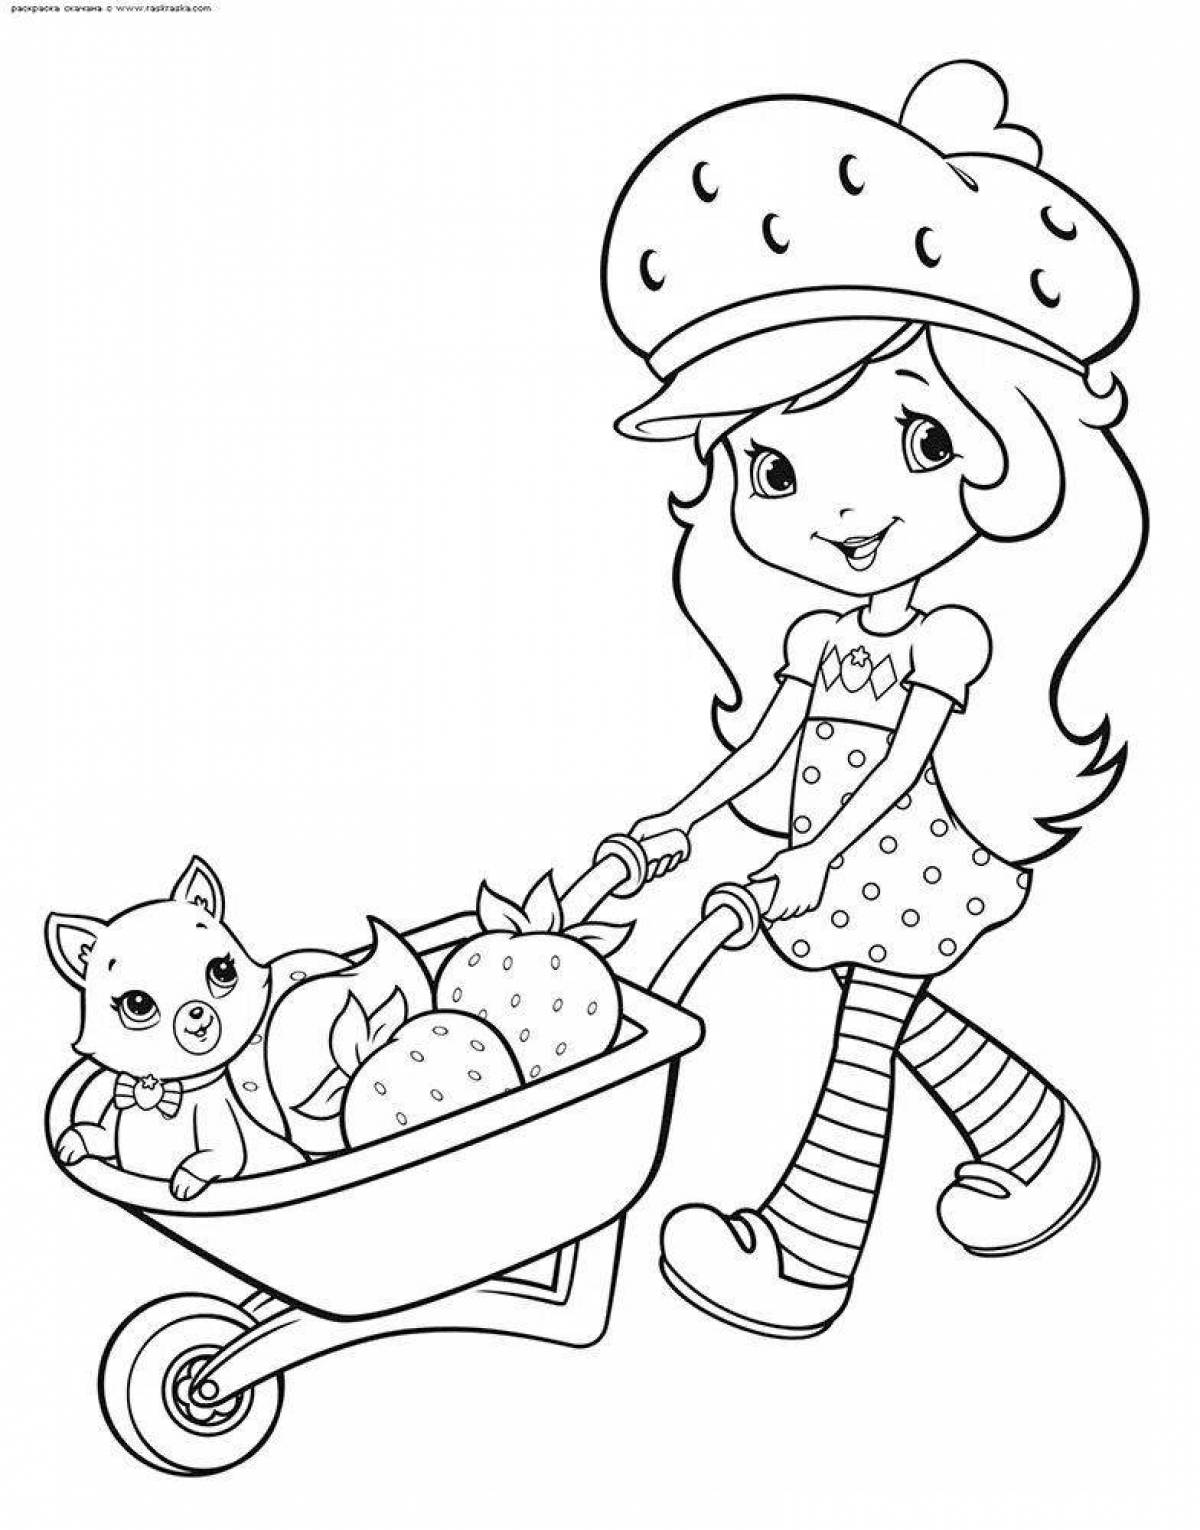 Coloring book funny strawberry